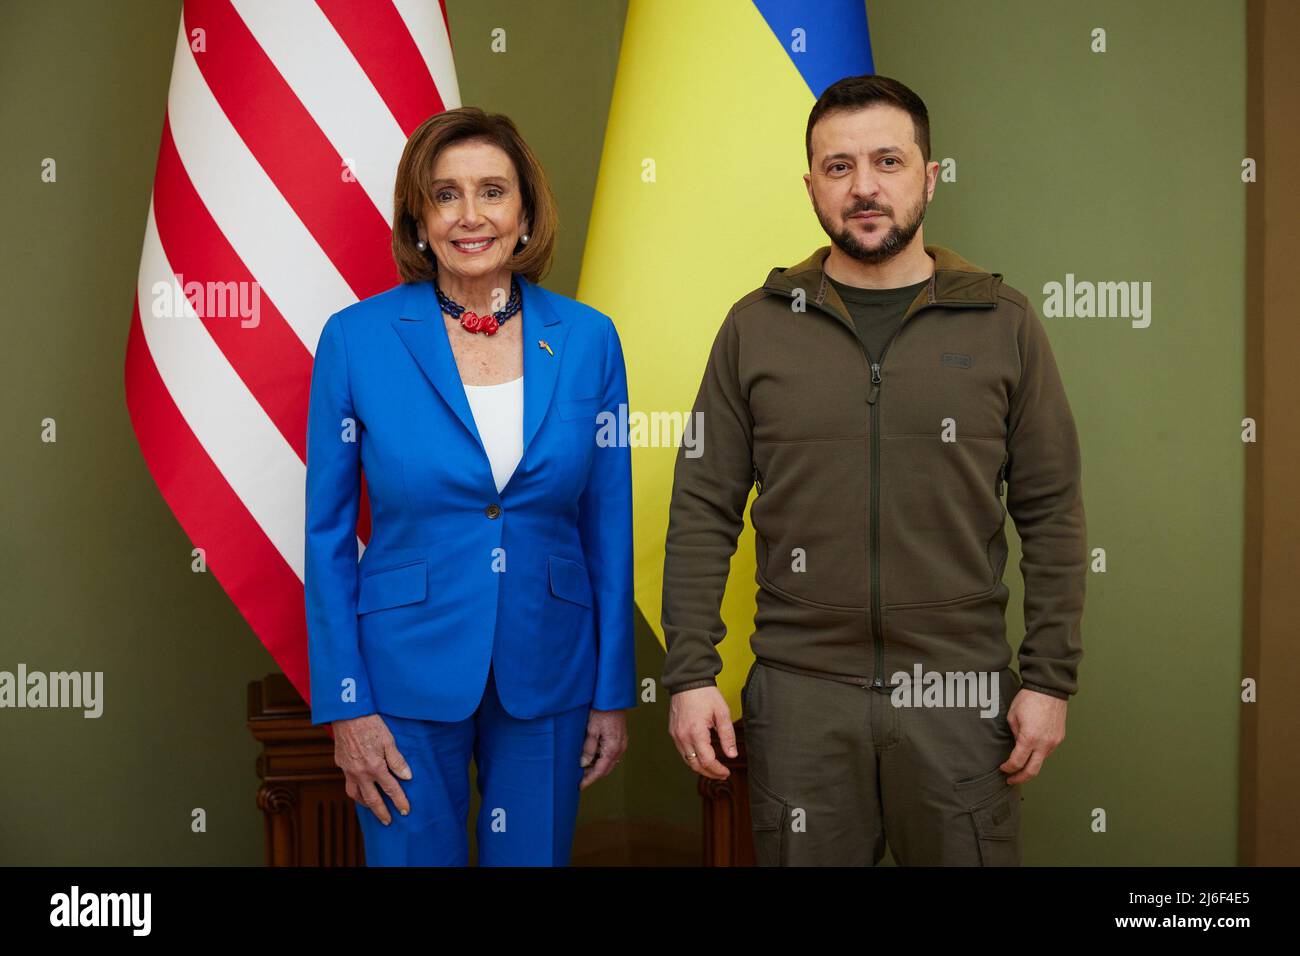 Kyiv, Ukraine. 01st May, 2022. Ukrainian President Volodymyr Zelenskyy, right, poses with Speaker of the U.S. House of Representatives Nancy Pelosi at the Mariyinsky palace, May 1, 2022 in Kyiv, Ukraine. Pelosi is the highest ranking elected U.S. official to visit Kyiv since the Russian invasion. Credit: Ukraine Presidency/Ukraine Presidency/Alamy Live News Stock Photo